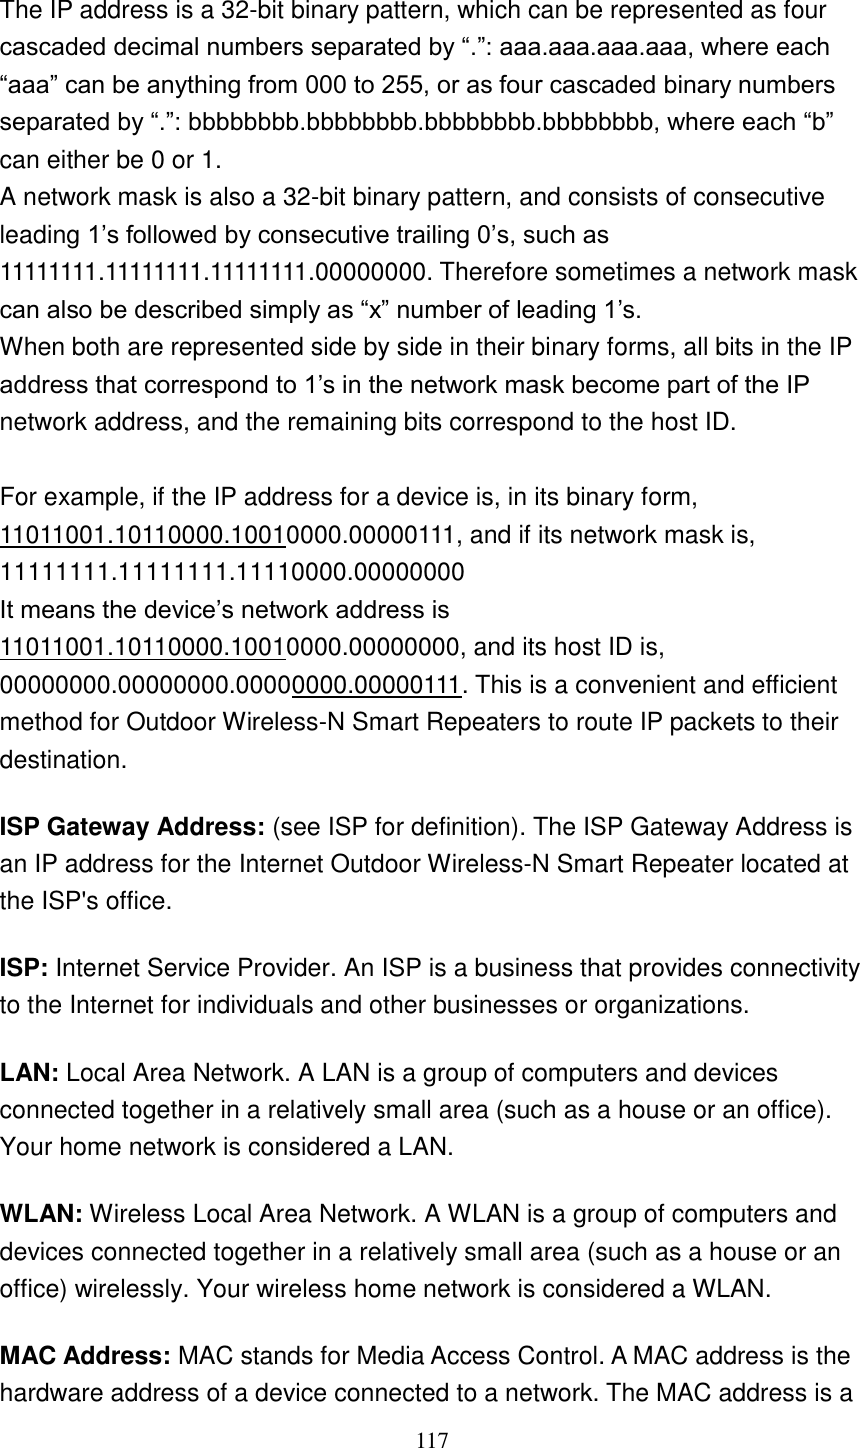 117  The IP address is a 32-bit binary pattern, which can be represented as four cascaded decimal numbers separated by “.”: aaa.aaa.aaa.aaa, where each “aaa” can be anything from 000 to 255, or as four cascaded binary numbers separated by “.”: bbbbbbbb.bbbbbbbb.bbbbbbbb.bbbbbbbb, where each “b” can either be 0 or 1. A network mask is also a 32-bit binary pattern, and consists of consecutive leading 1‟s followed by consecutive trailing 0‟s, such as 11111111.11111111.11111111.00000000. Therefore sometimes a network mask can also be described simply as “x” number of leading 1‟s. When both are represented side by side in their binary forms, all bits in the IP address that correspond to 1‟s in the network mask become part of the IP network address, and the remaining bits correspond to the host ID.    For example, if the IP address for a device is, in its binary form, 11011001.10110000.10010000.00000111, and if its network mask is, 11111111.11111111.11110000.00000000 It means the device‟s network address is   11011001.10110000.10010000.00000000, and its host ID is, 00000000.00000000.00000000.00000111. This is a convenient and efficient method for Outdoor Wireless-N Smart Repeaters to route IP packets to their destination. ISP Gateway Address: (see ISP for definition). The ISP Gateway Address is an IP address for the Internet Outdoor Wireless-N Smart Repeater located at the ISP&apos;s office.   ISP: Internet Service Provider. An ISP is a business that provides connectivity to the Internet for individuals and other businesses or organizations.   LAN: Local Area Network. A LAN is a group of computers and devices connected together in a relatively small area (such as a house or an office). Your home network is considered a LAN.   WLAN: Wireless Local Area Network. A WLAN is a group of computers and devices connected together in a relatively small area (such as a house or an office) wirelessly. Your wireless home network is considered a WLAN.   MAC Address: MAC stands for Media Access Control. A MAC address is the hardware address of a device connected to a network. The MAC address is a 